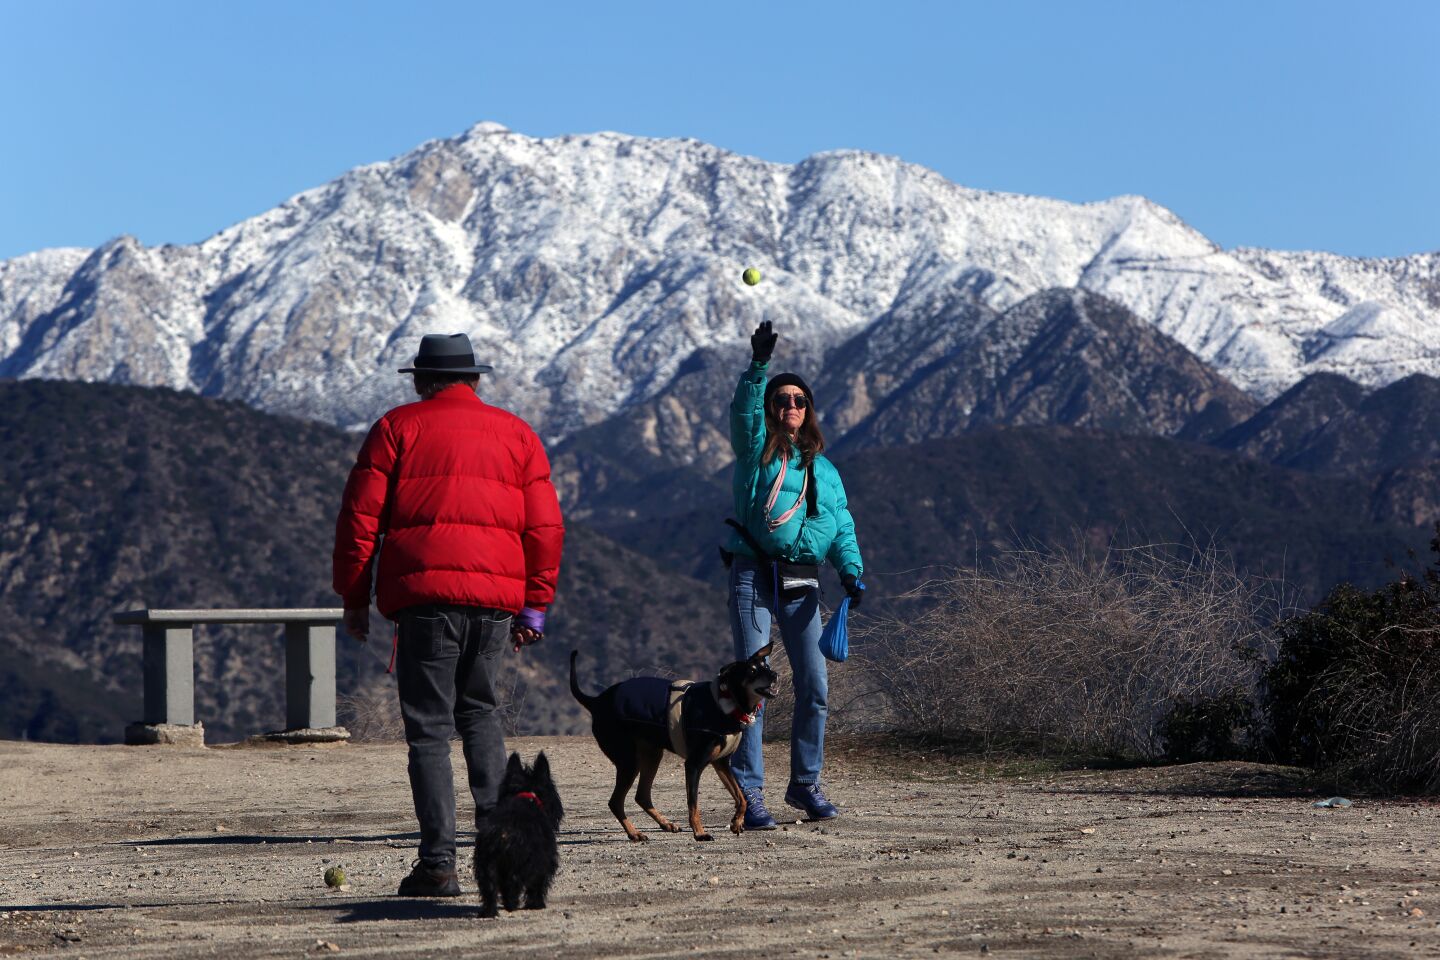 Goetz Wolff, left, and Paula Sirola toss a ball with their dogs in La Cañada Flintridge with the snow capped San Gabriel Mountains as a backdrop.